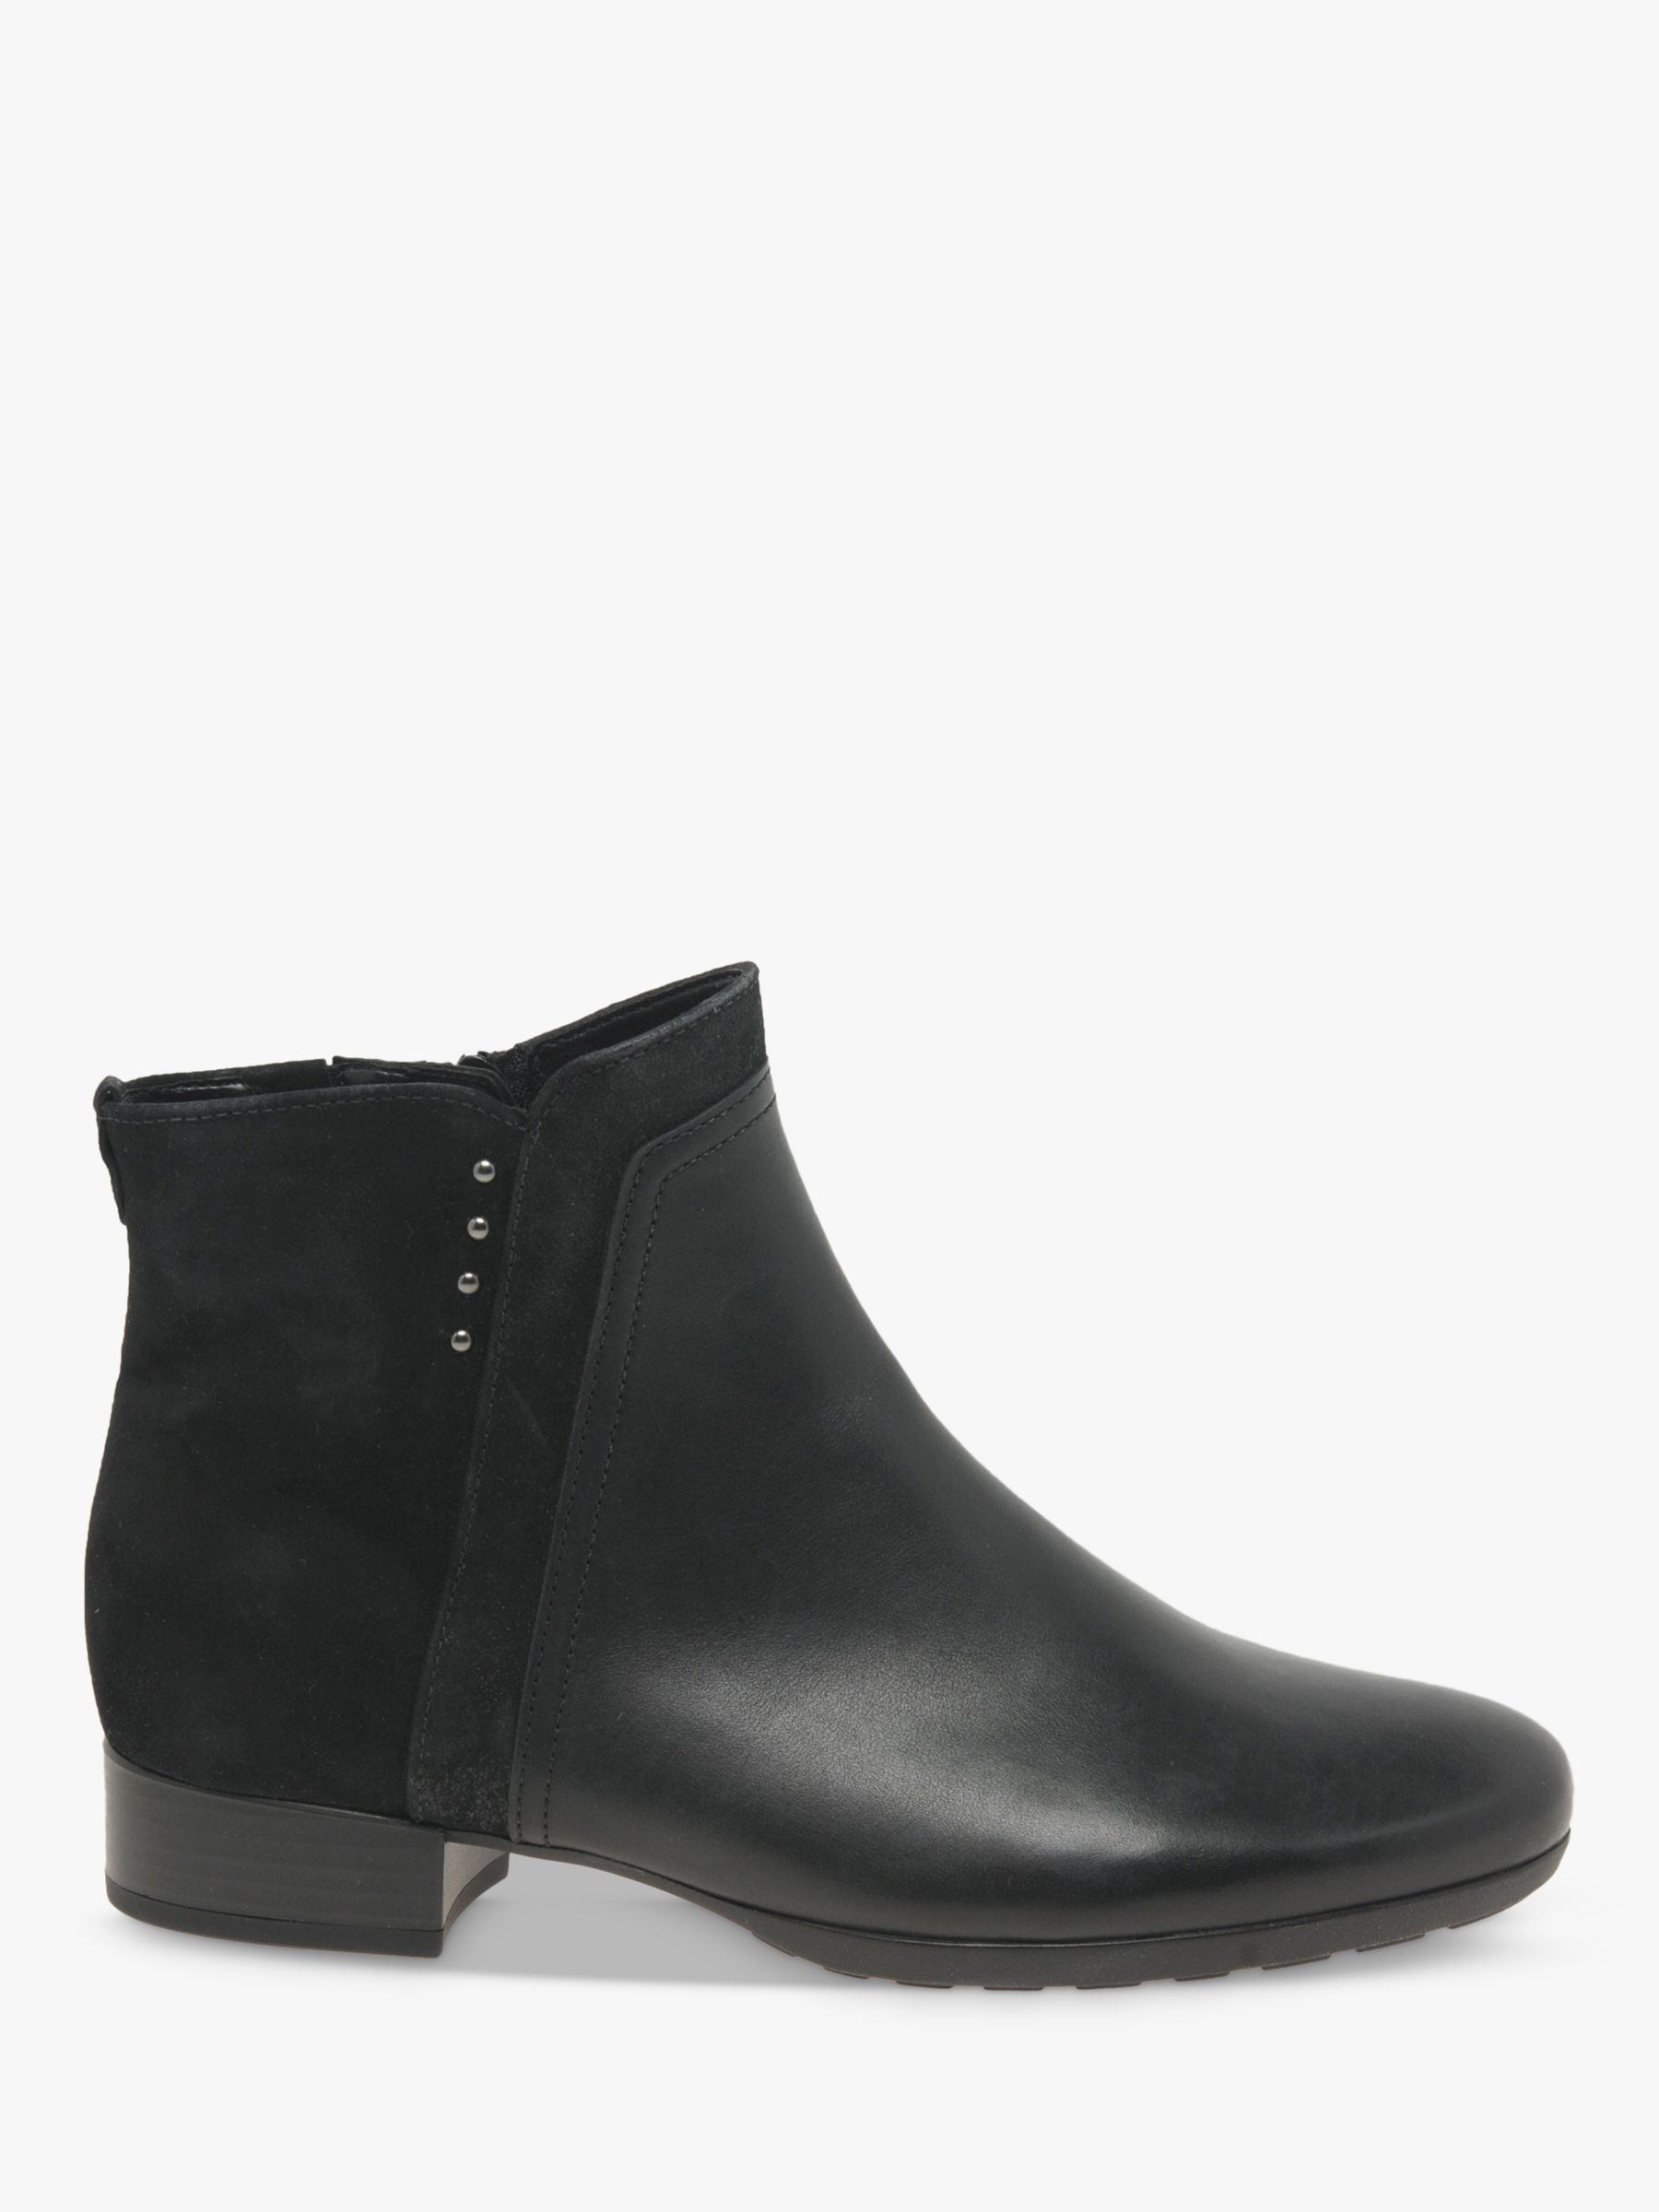 Gabor Breck Wide Fit Contrast Back Leather Ankle Black at Lewis & Partners